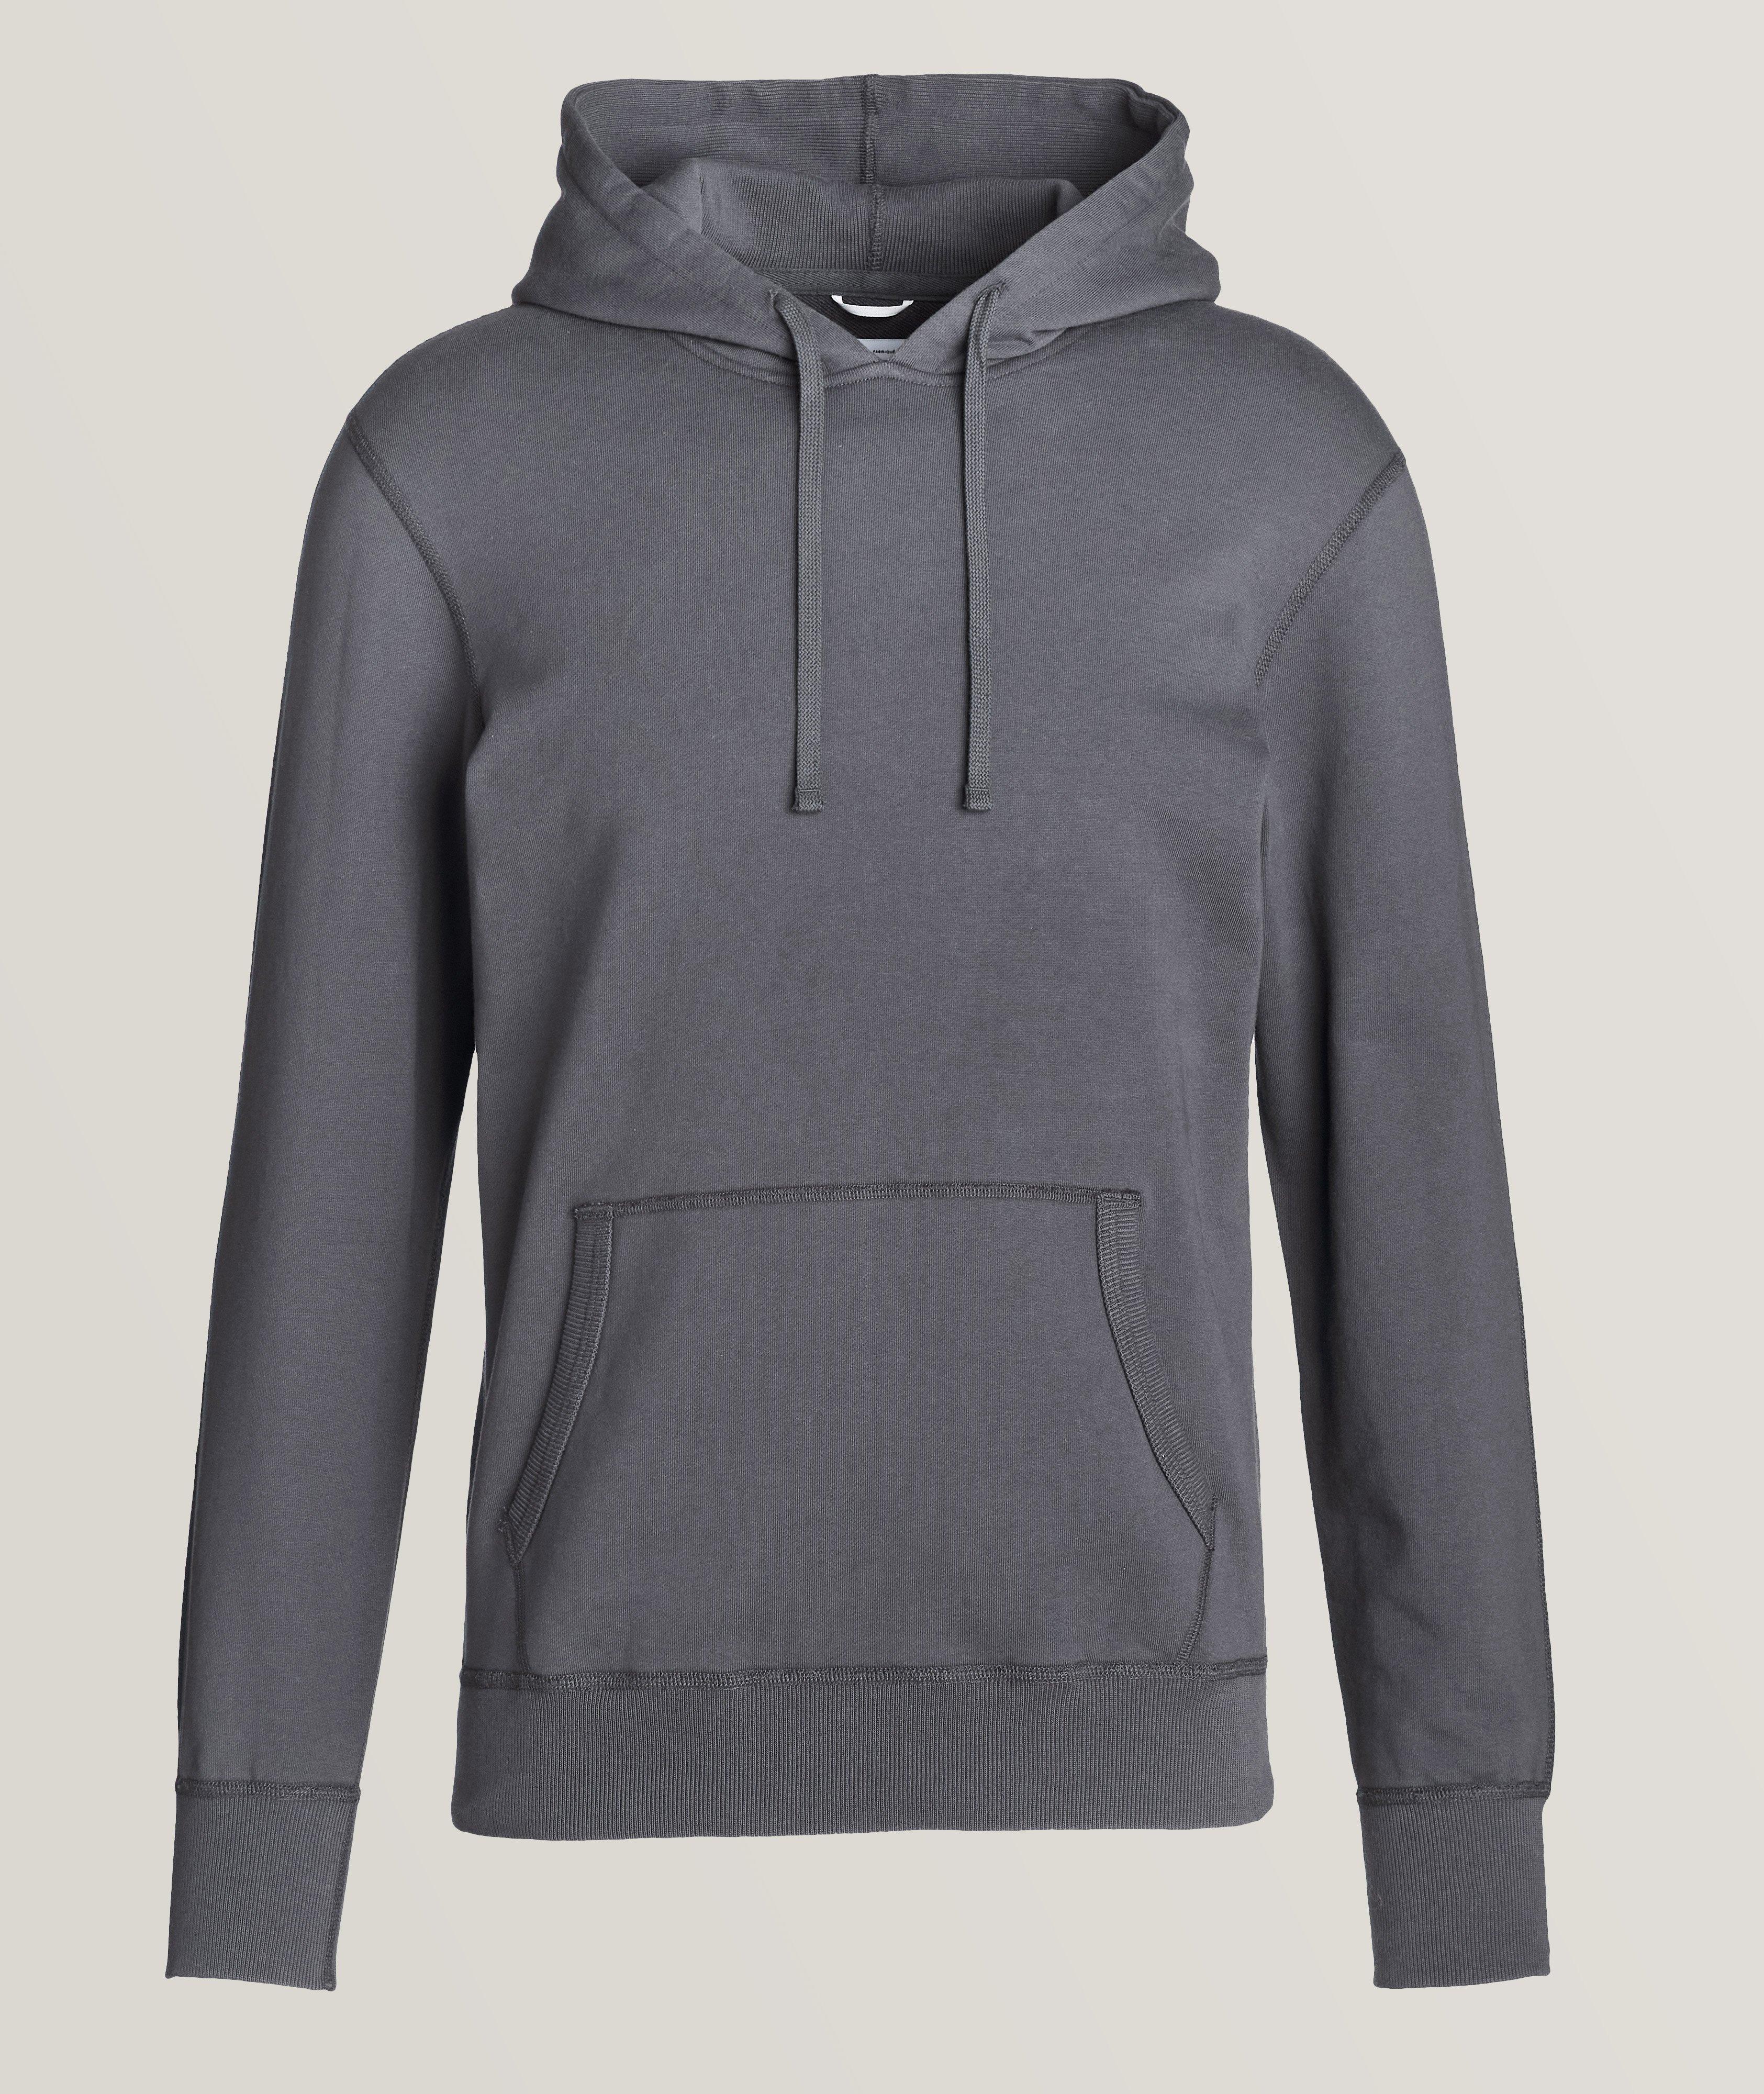 Terry Pullover Hooded Sweater image 0